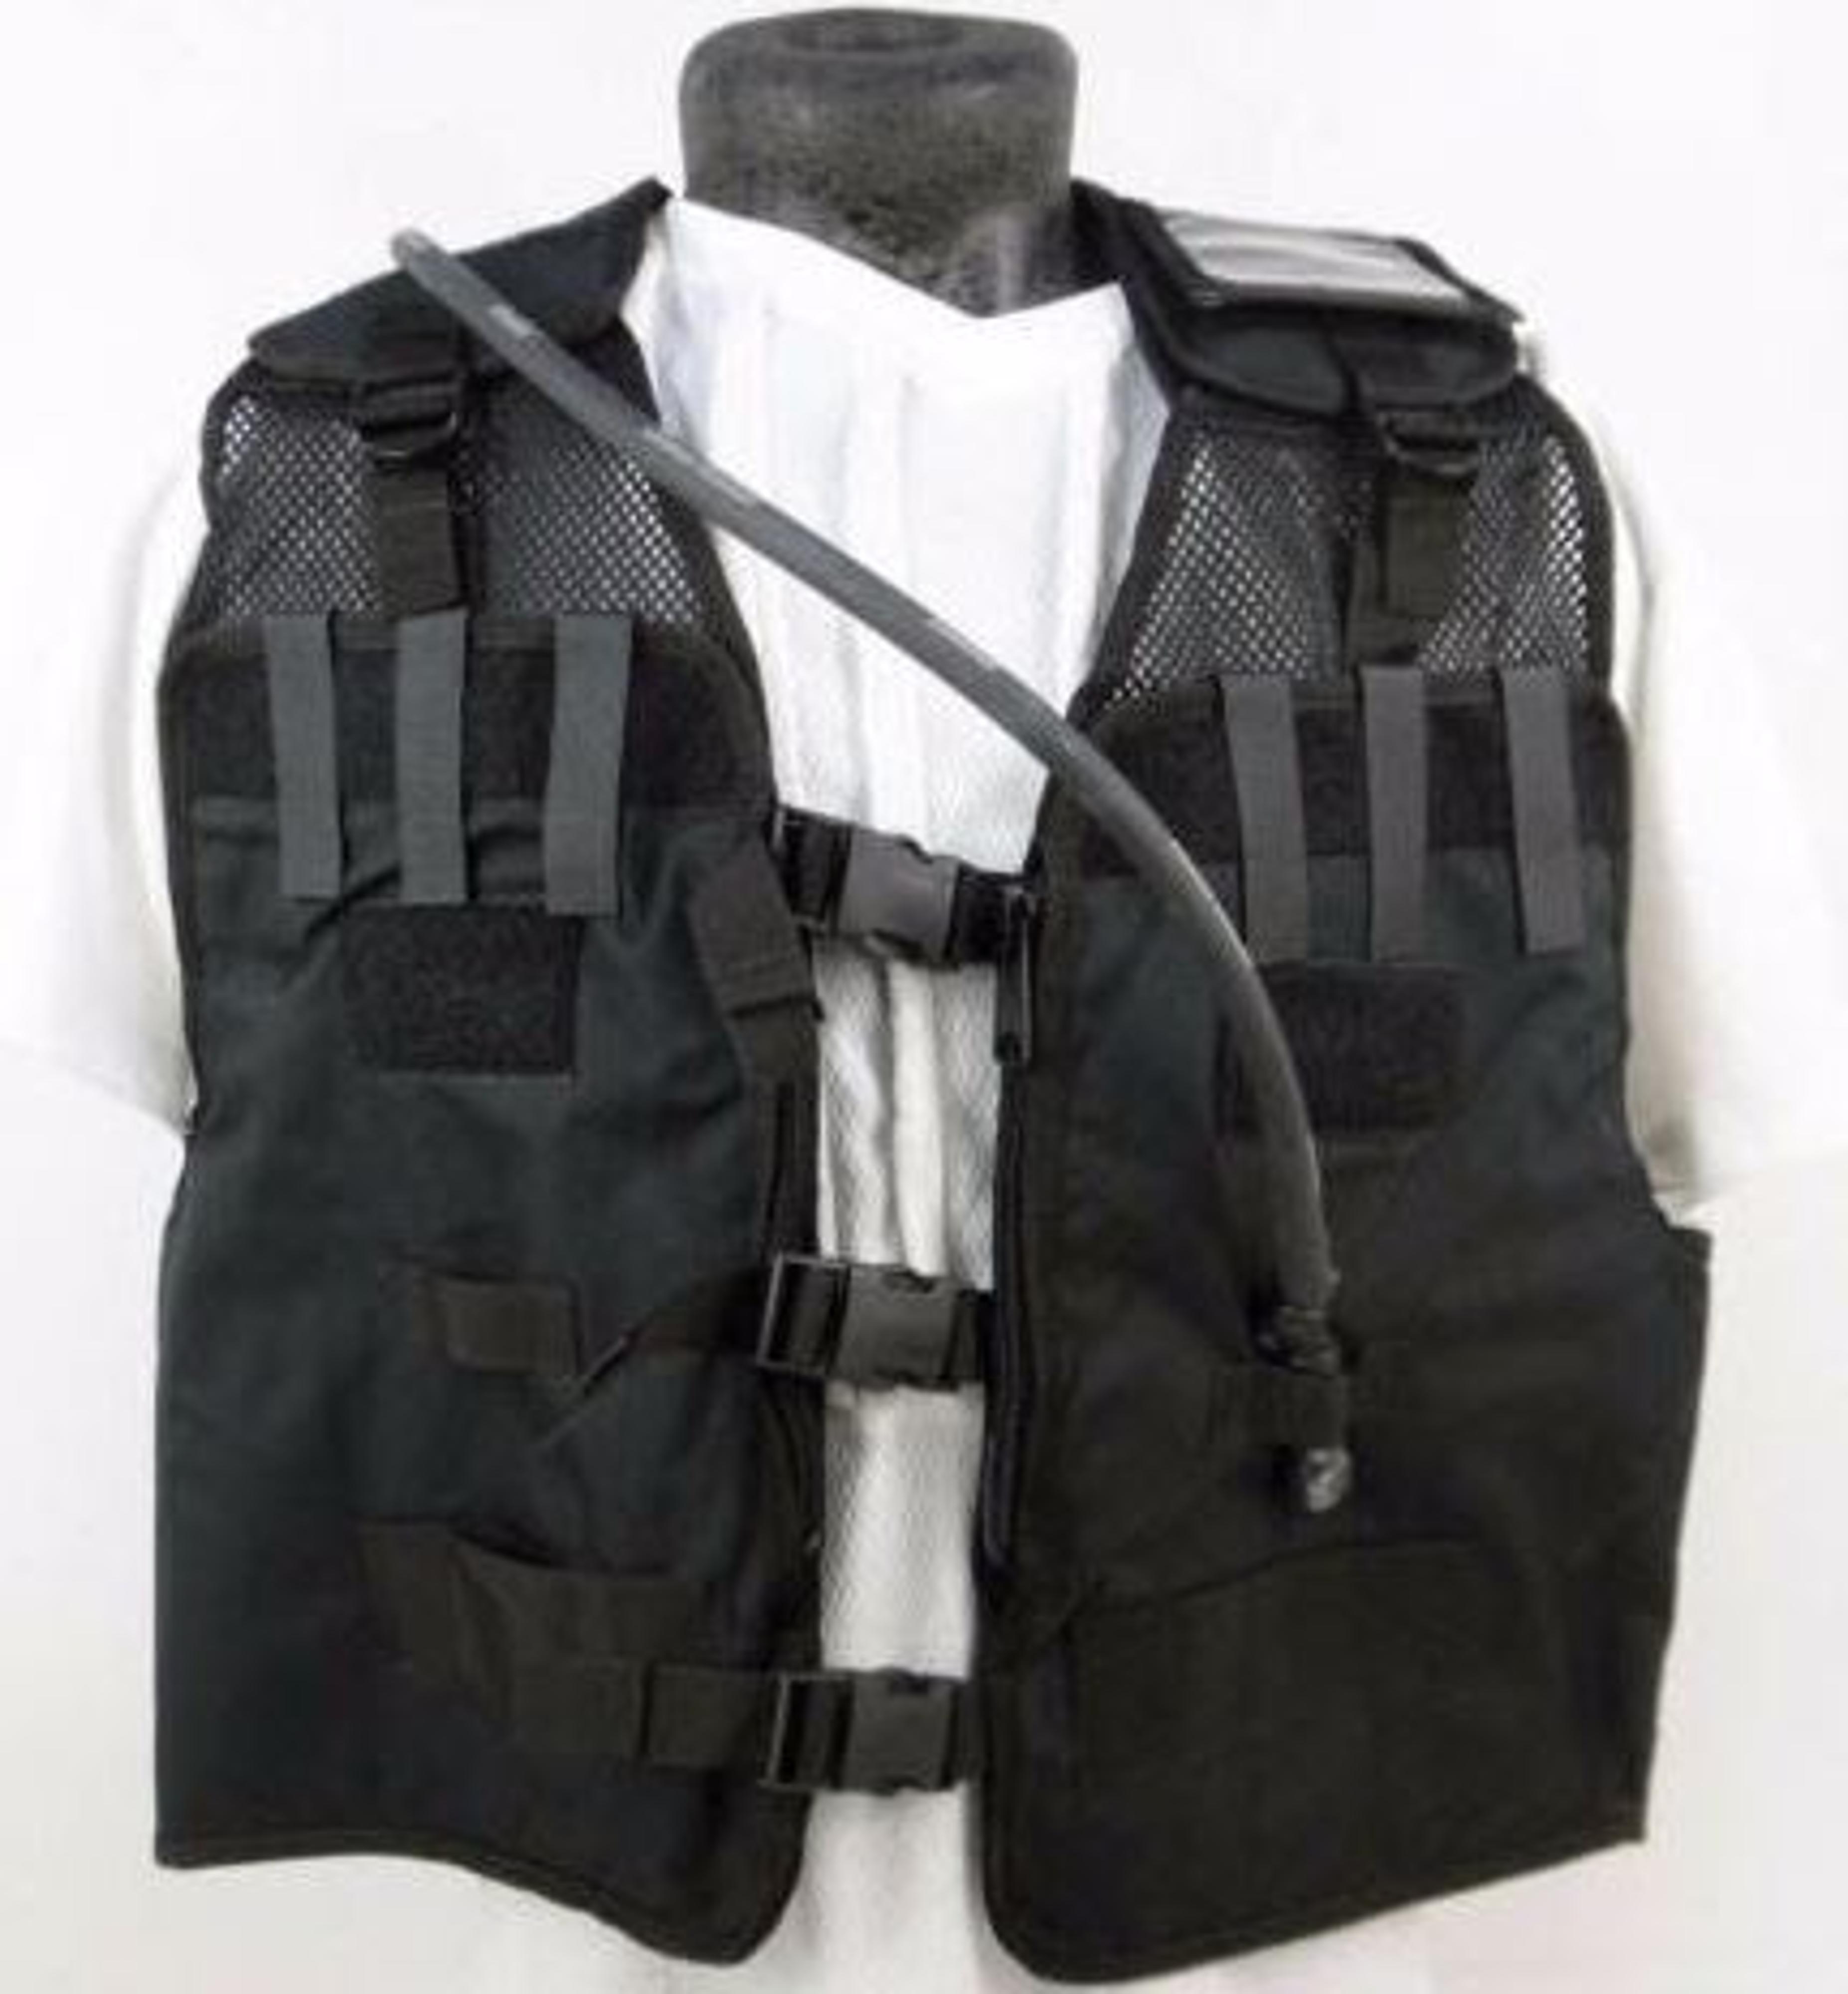 Black Remploy Frontline Hydration Tactical Vest MK2 Pouch And Camelbak Bladder 